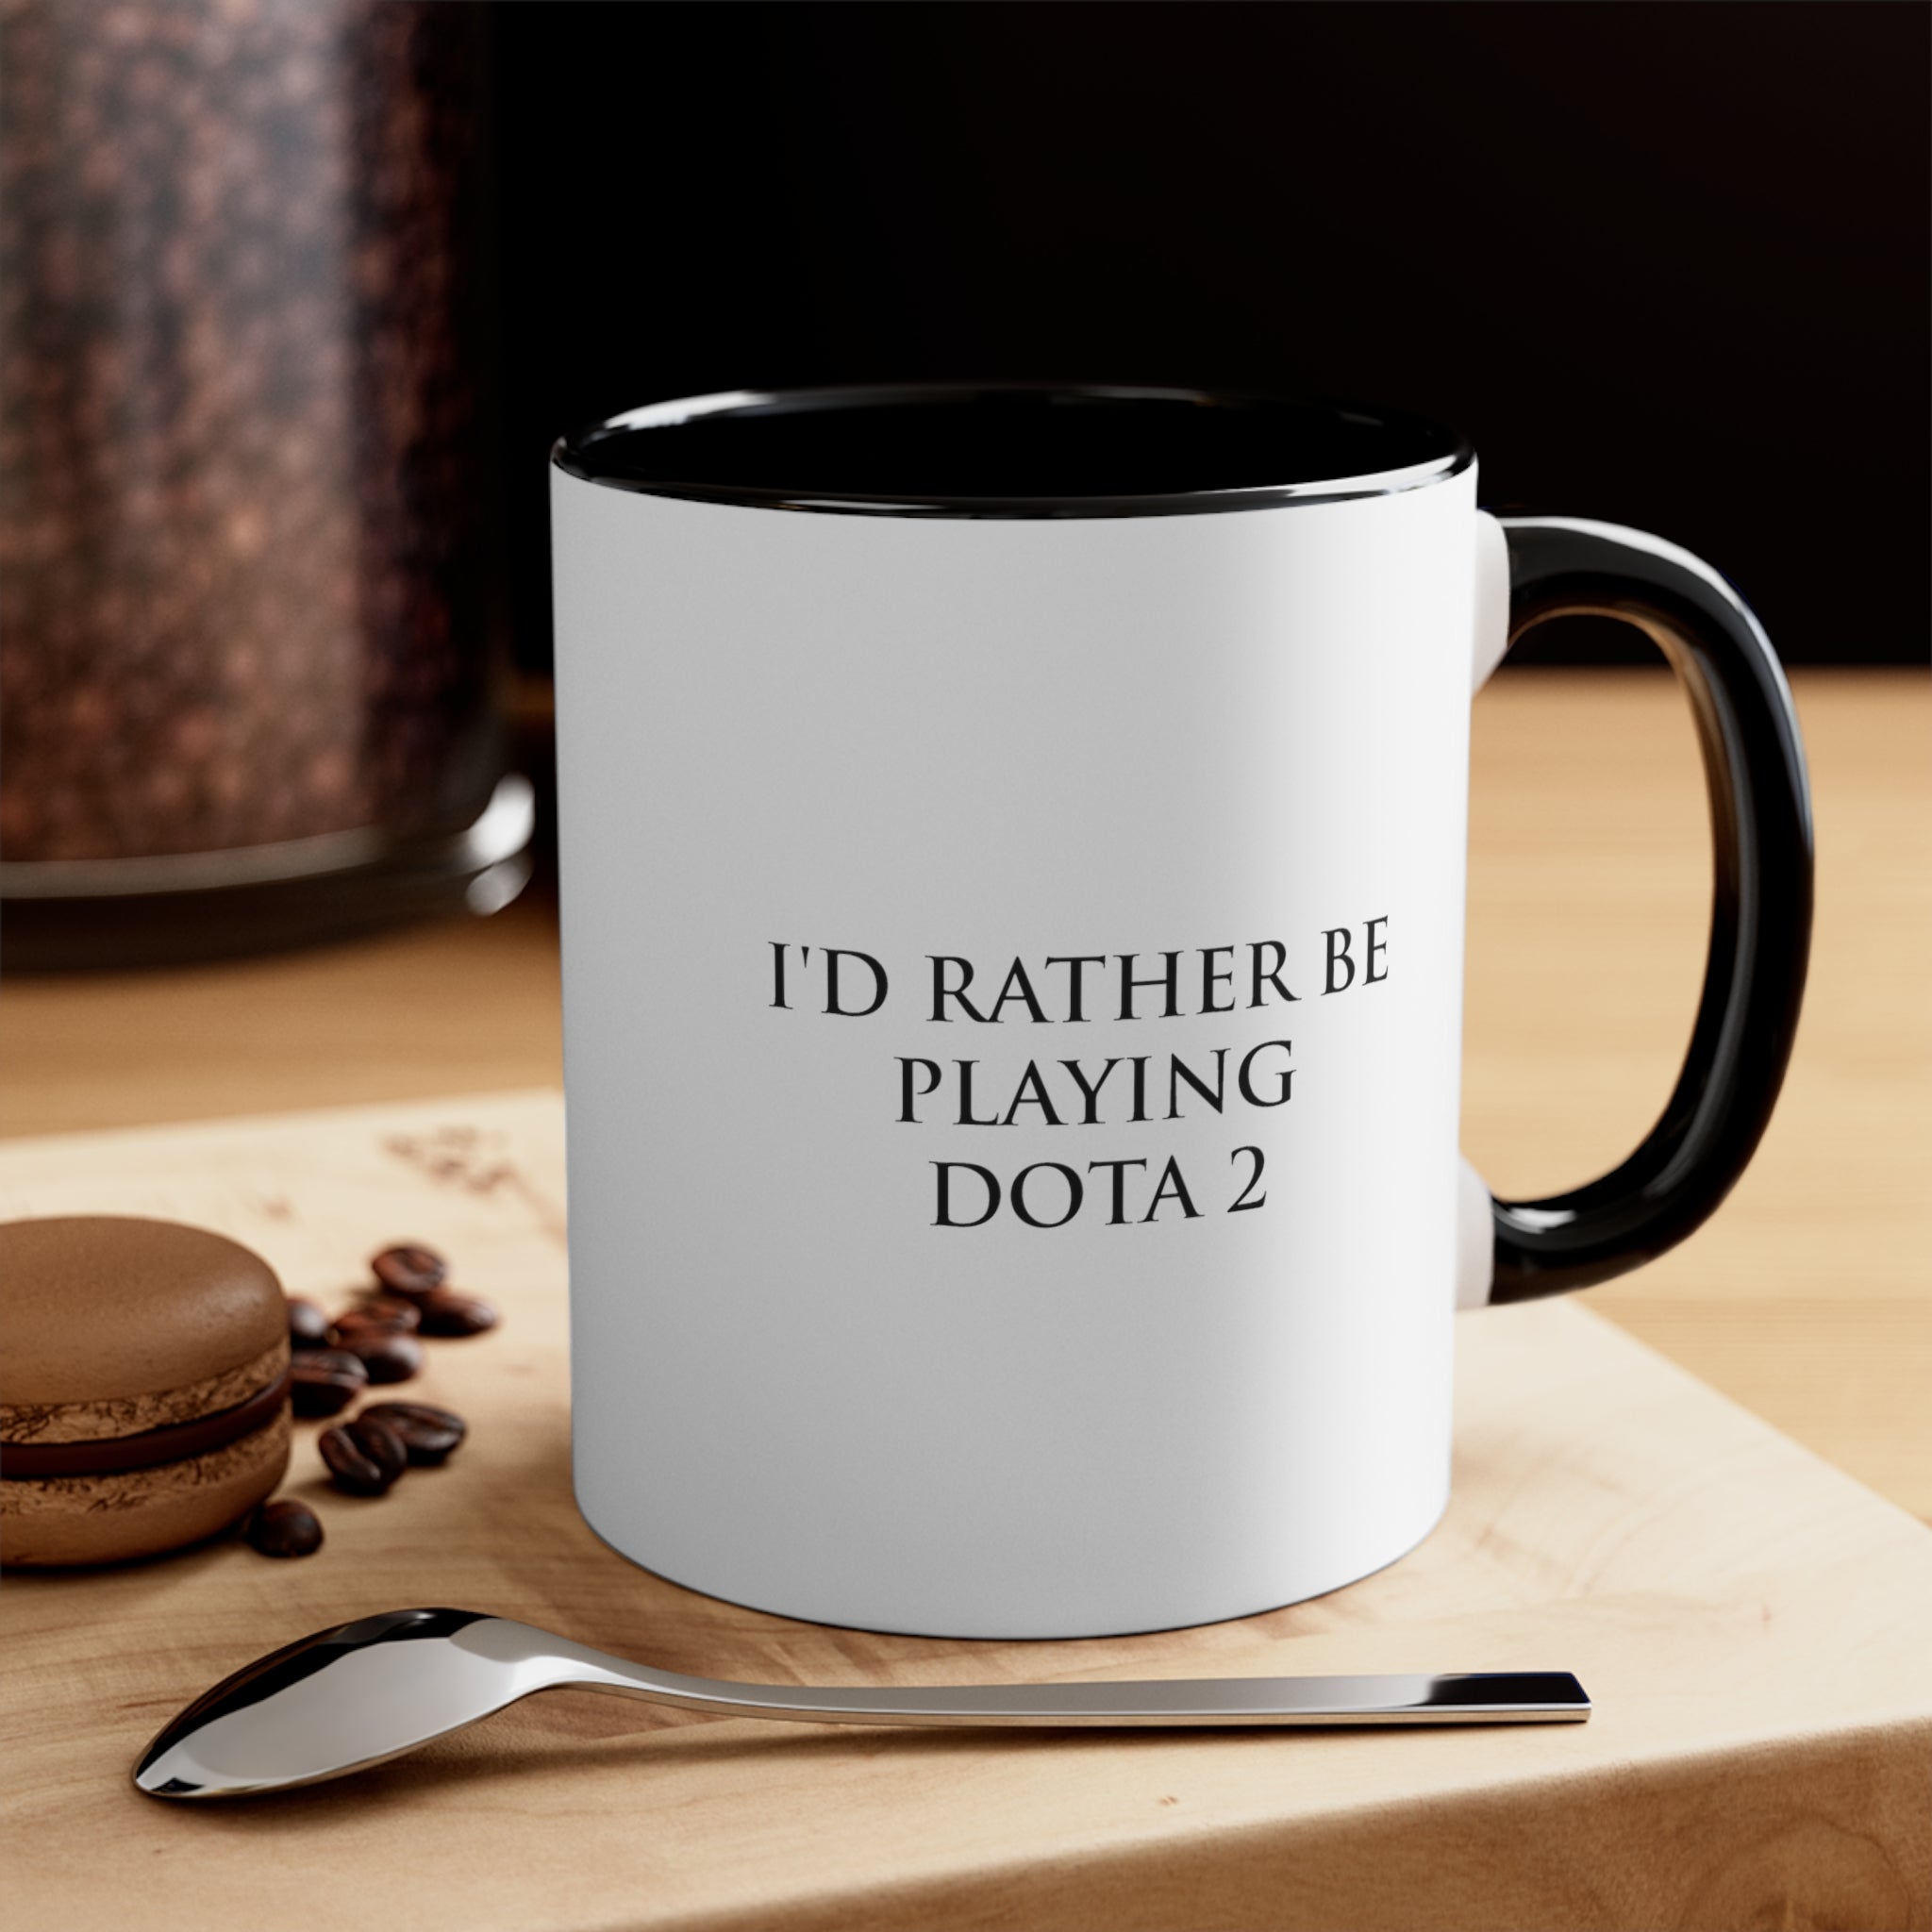 Dota 2 I'd Rather Be Playing Coffee Mug, 11oz Cups Mugs Cup Gamer Gift For Him Her Game Cup Cups Mugs Birthday Christmas Valentine's Anniversary Gifts